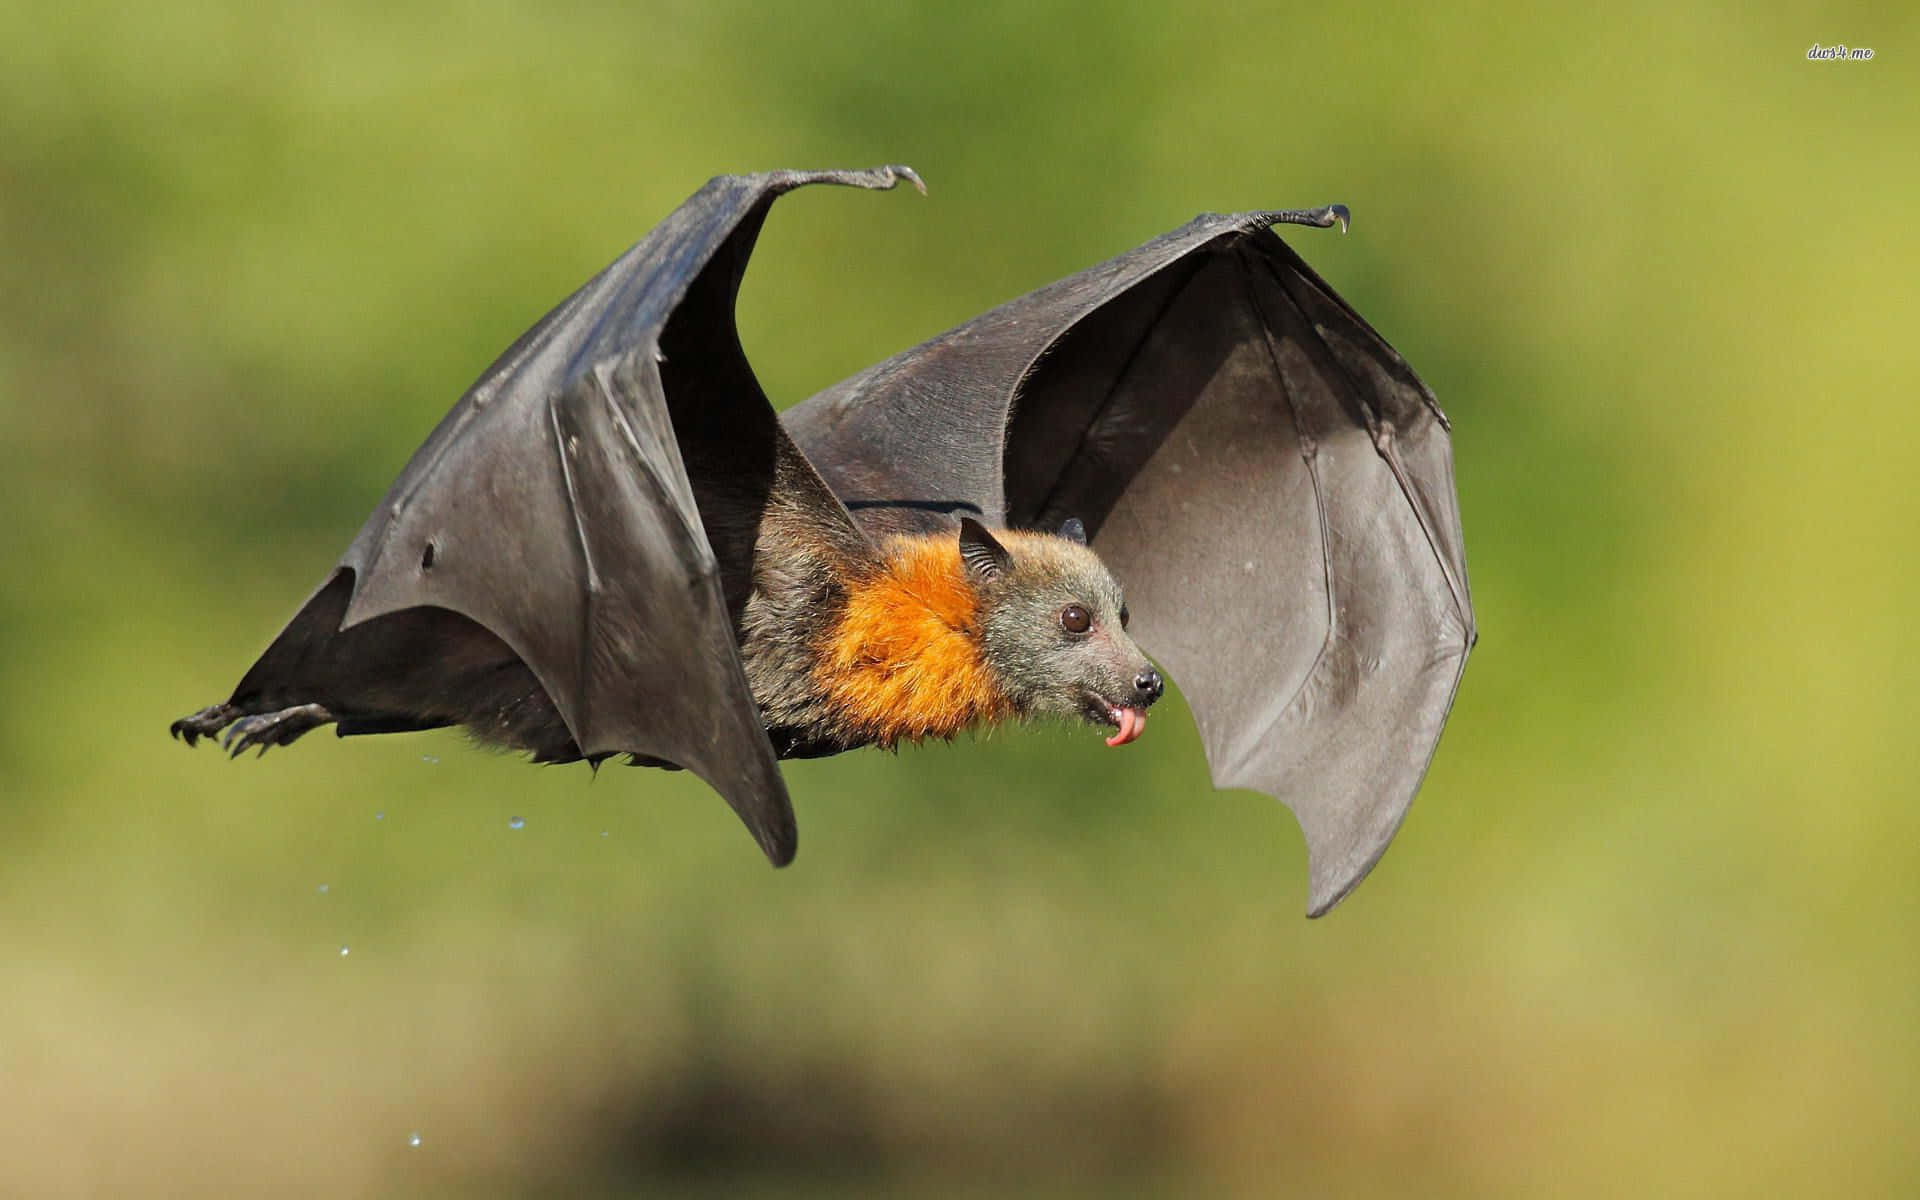 Cute Flying Bat Pictures